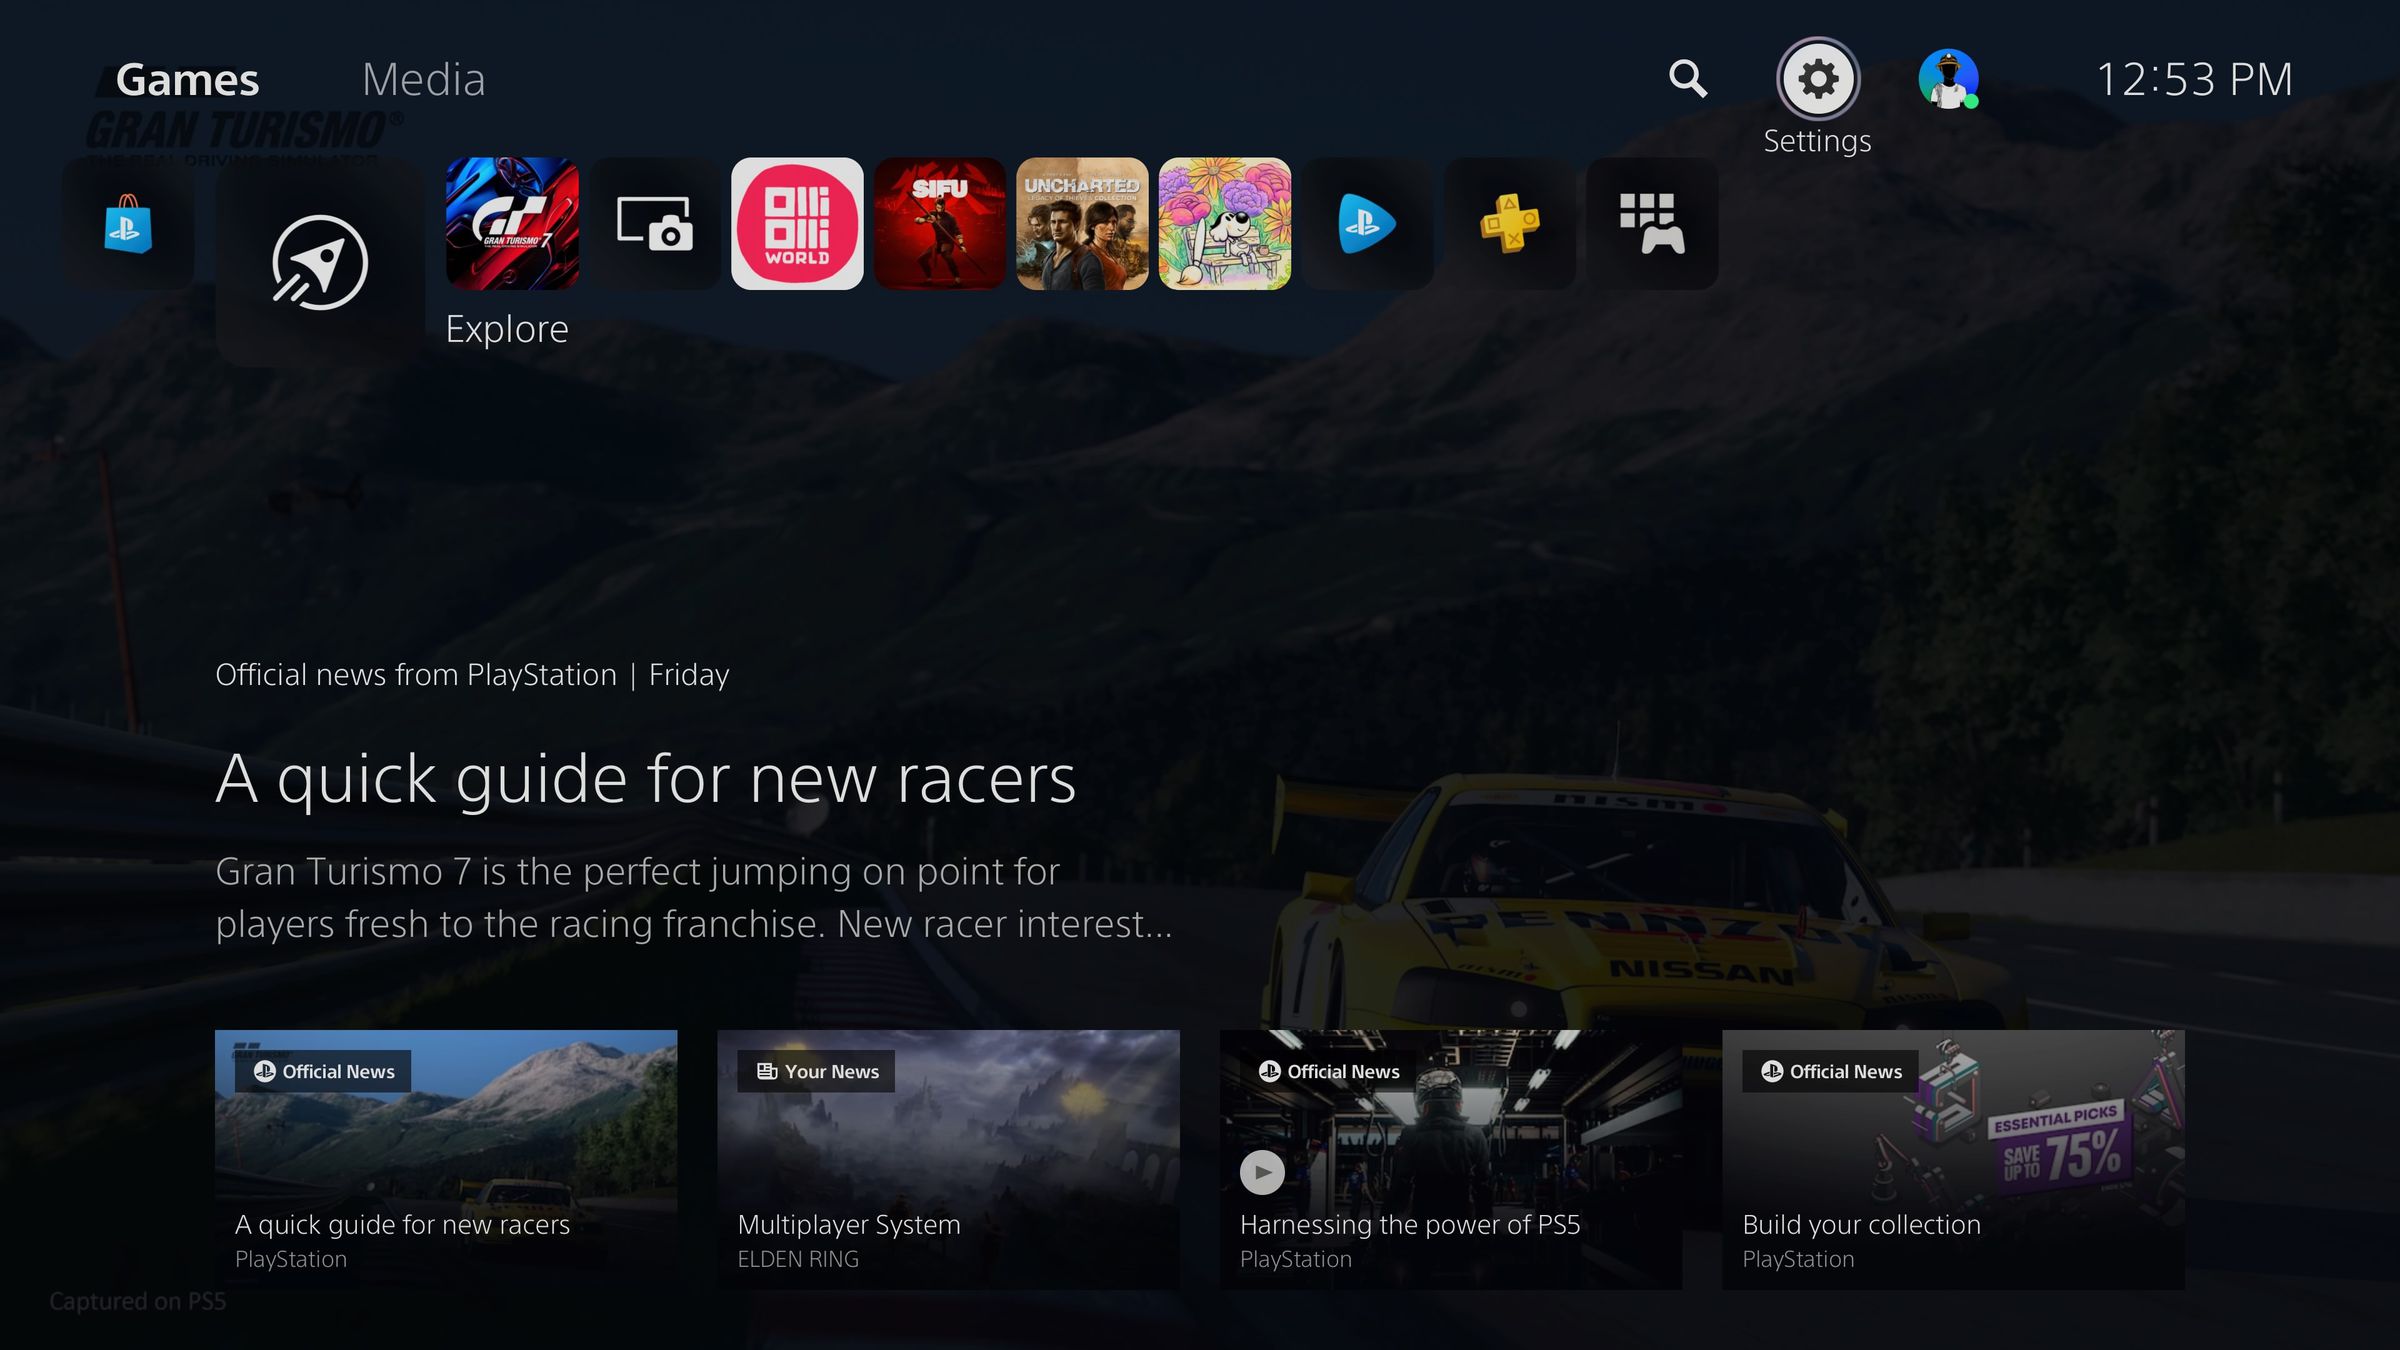 <em>The settings menu is found at the far right of the home screen on PS5.</em>